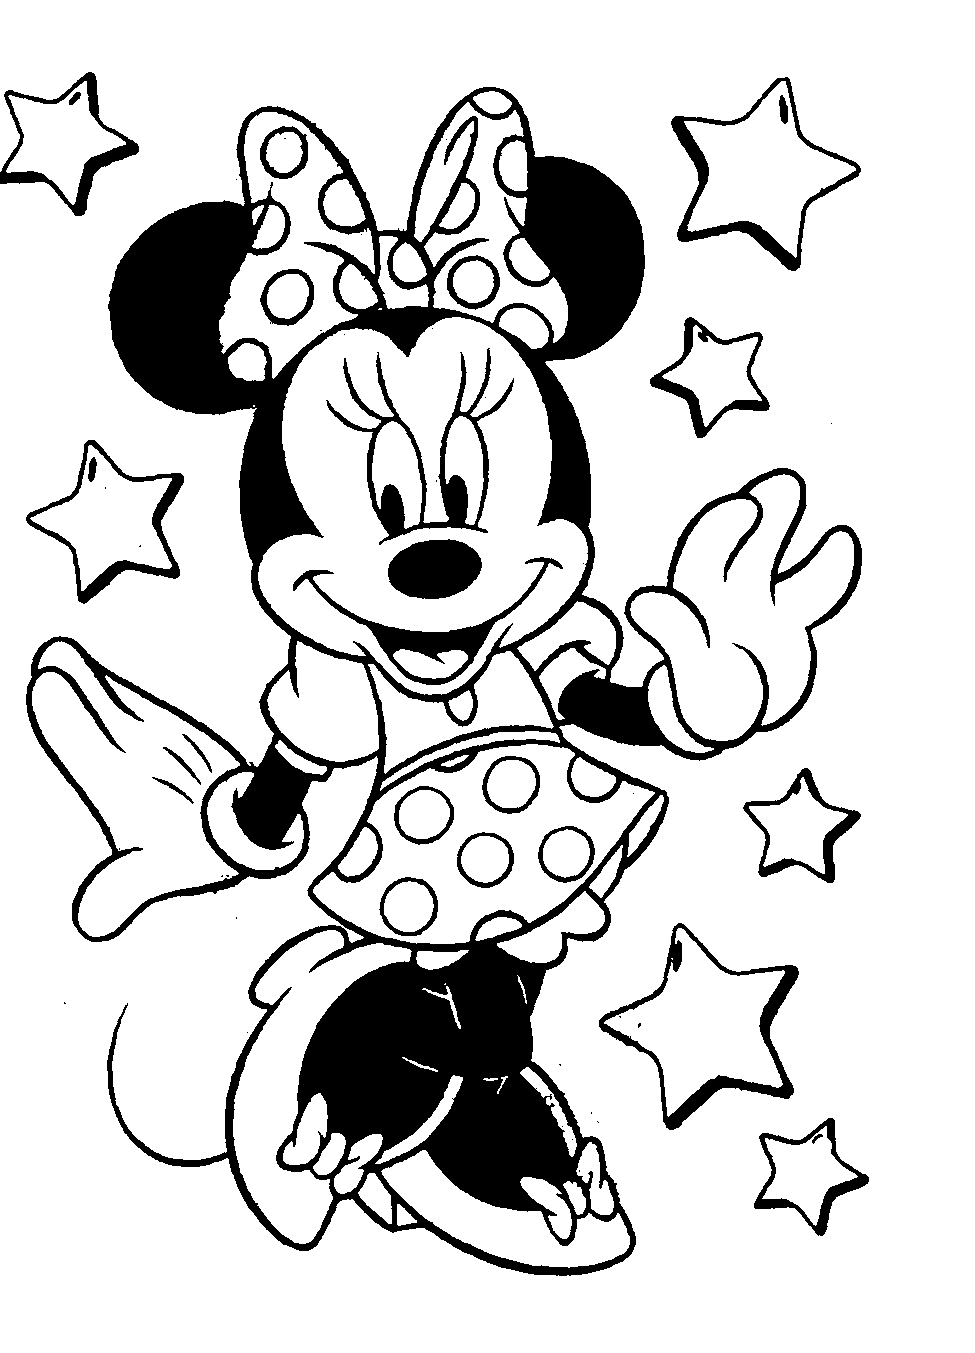 mickey mouse coloring page mickey mouse coloring pages 7 disney39s world of wonders mouse coloring page mickey 